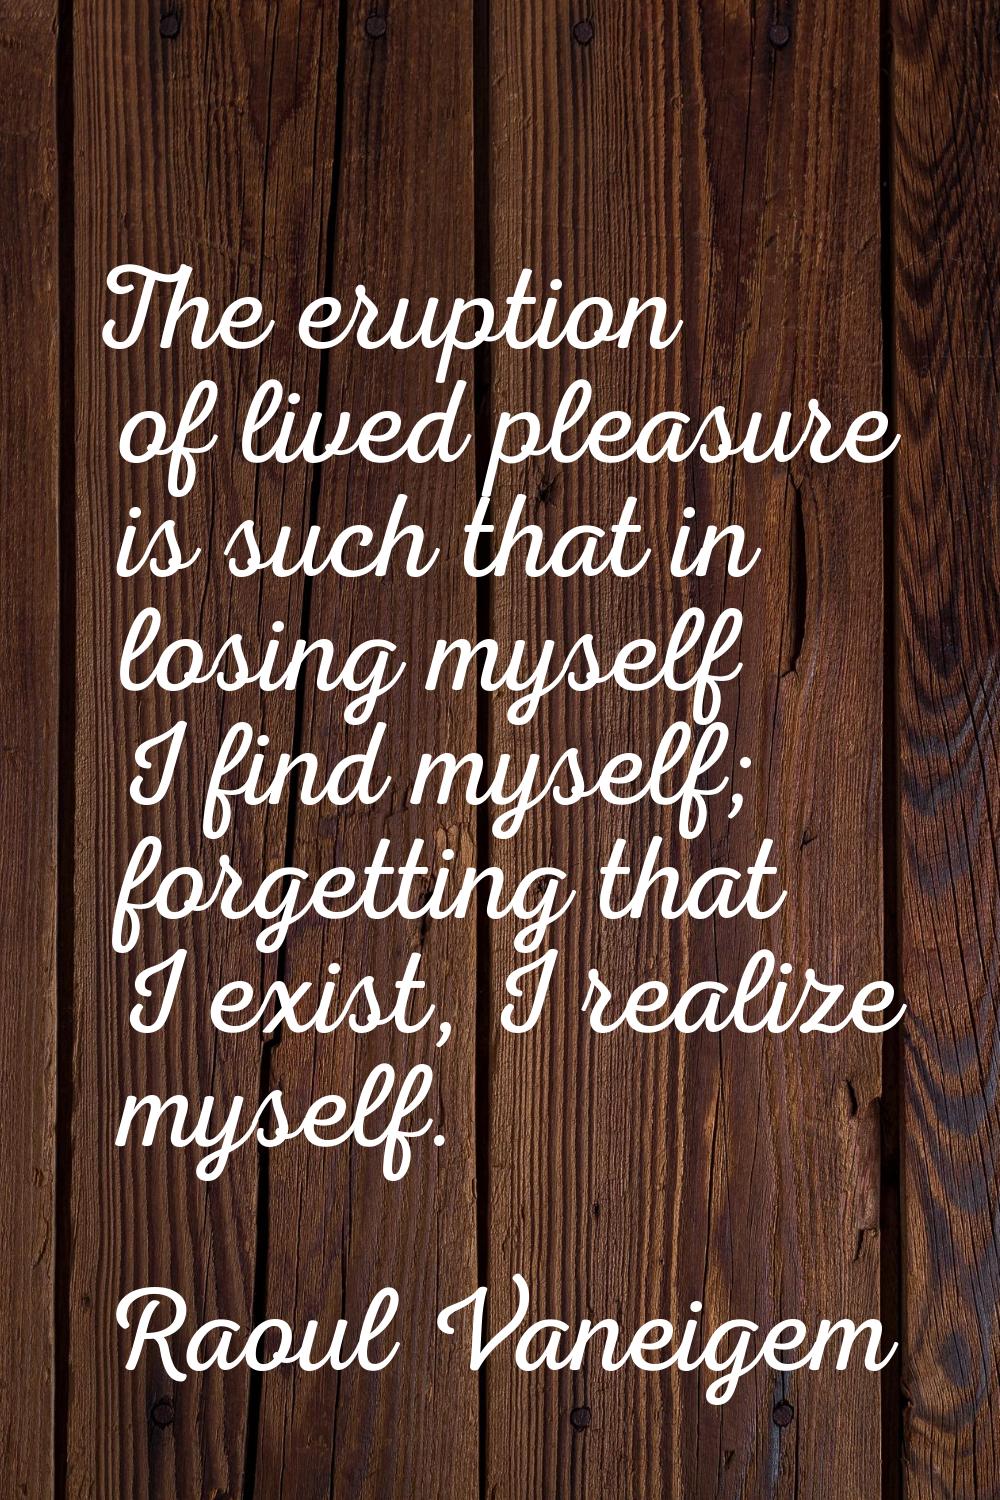 The eruption of lived pleasure is such that in losing myself I find myself; forgetting that I exist